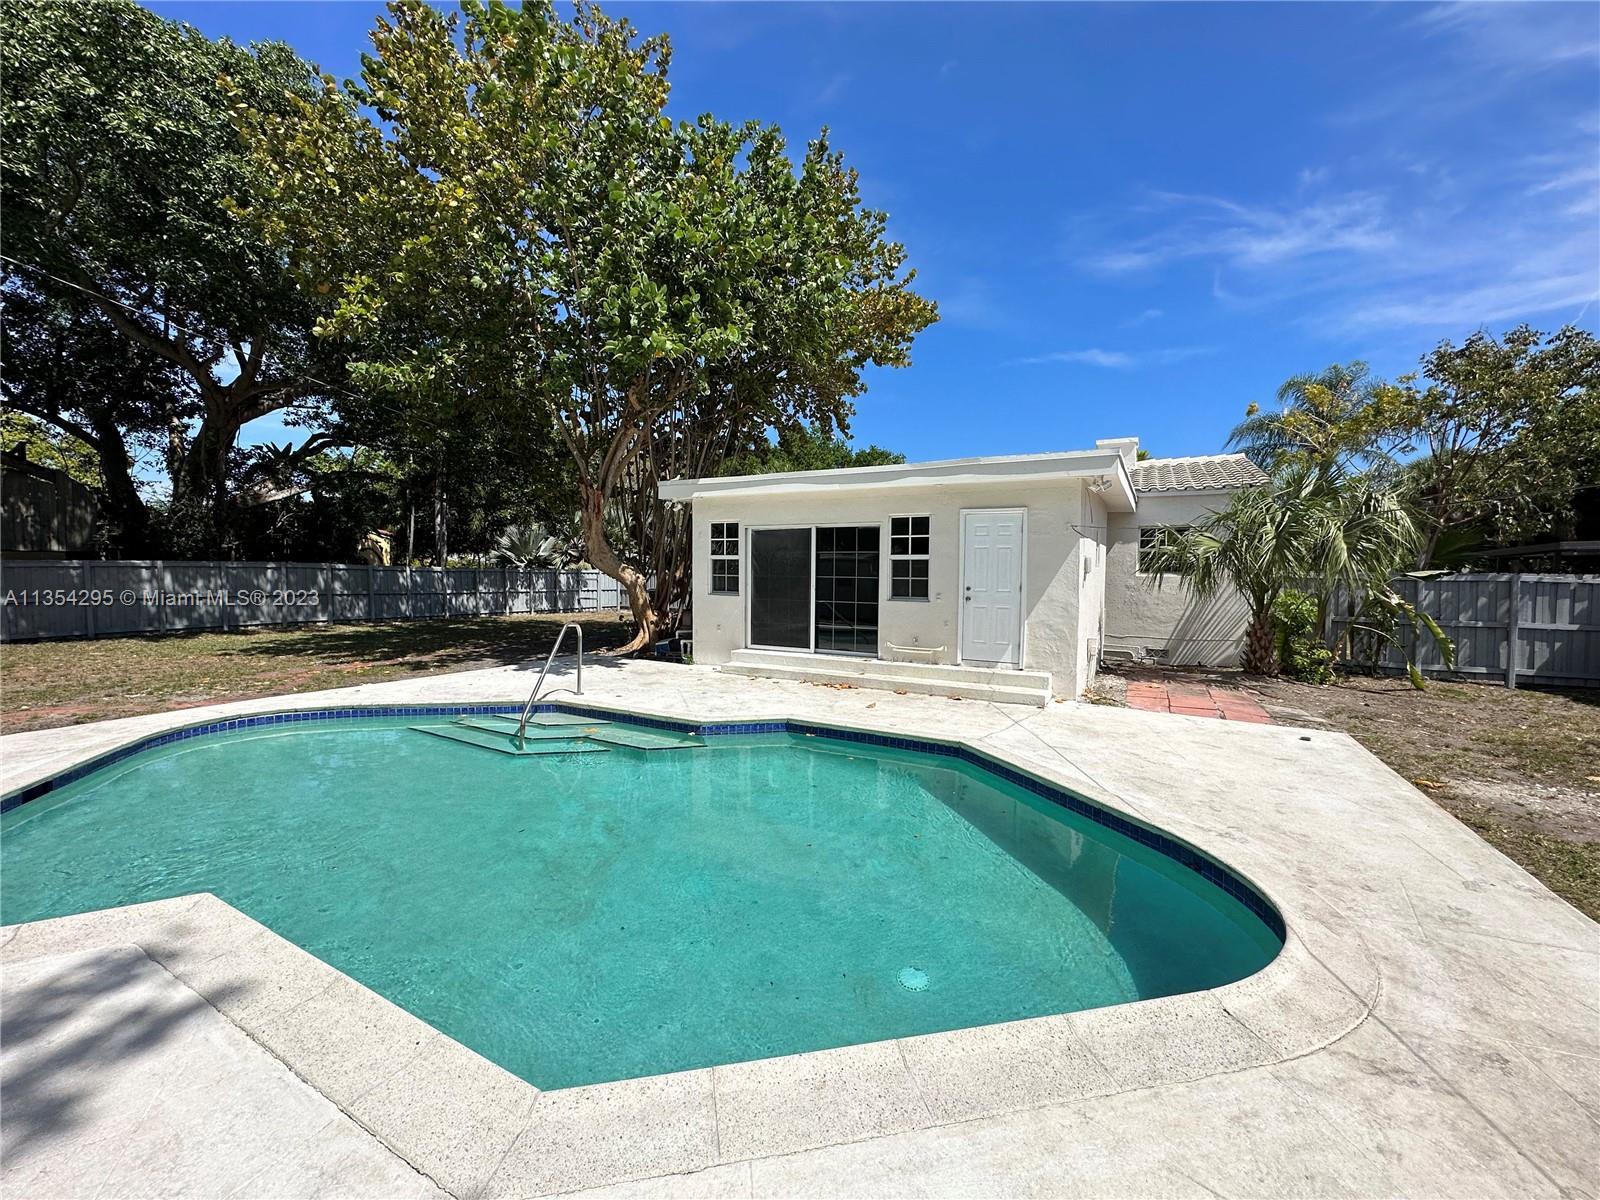 3 bedroom, 2 bath home has a great Pool on an OVERSIZED LOT. IMPACT WINDOWS. Barrel tile roof. Huge 